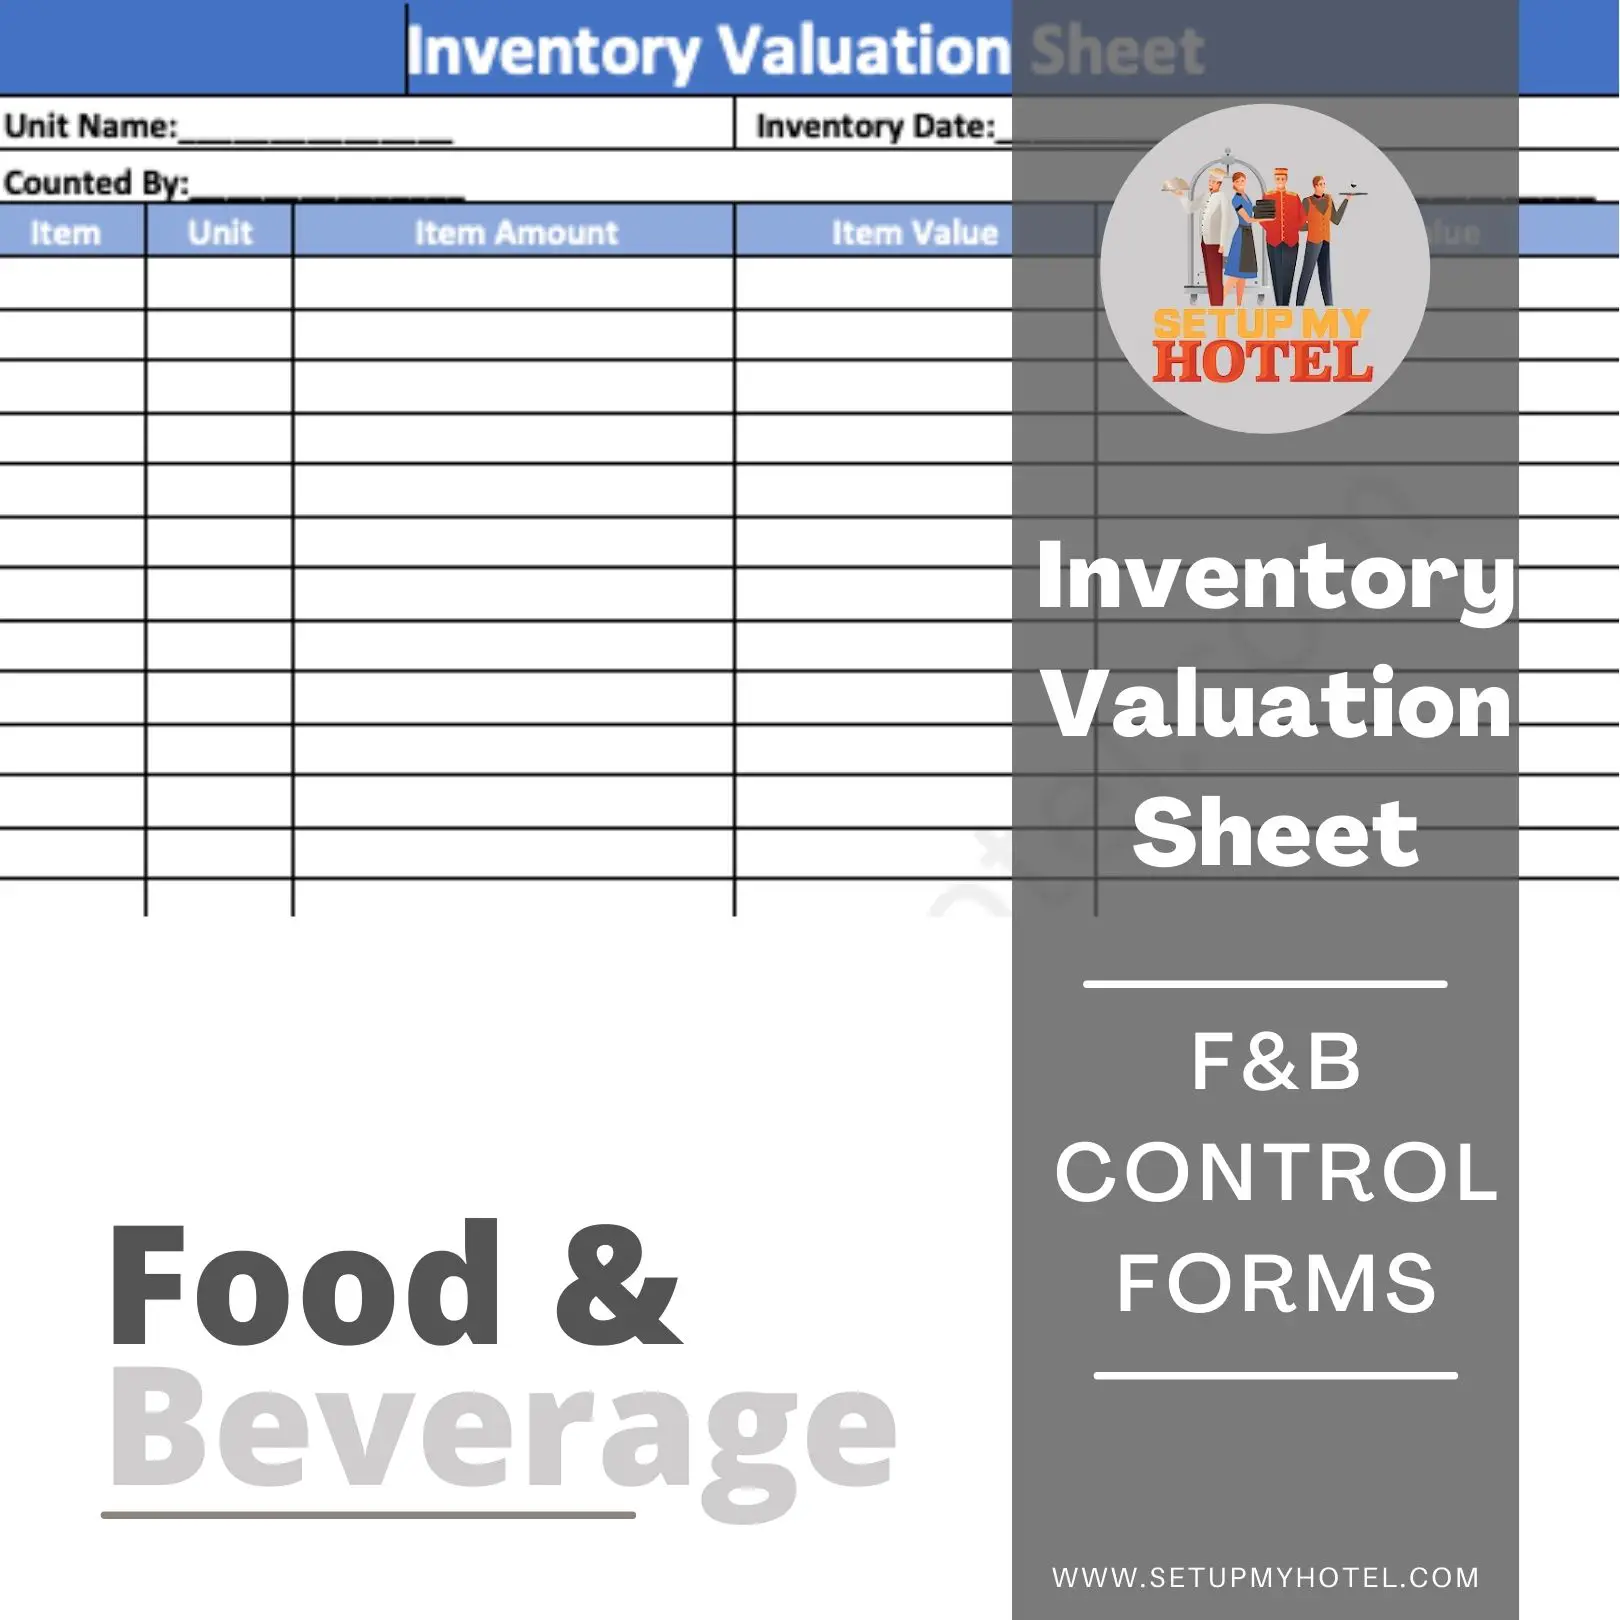 Inventory Valuation Sheet